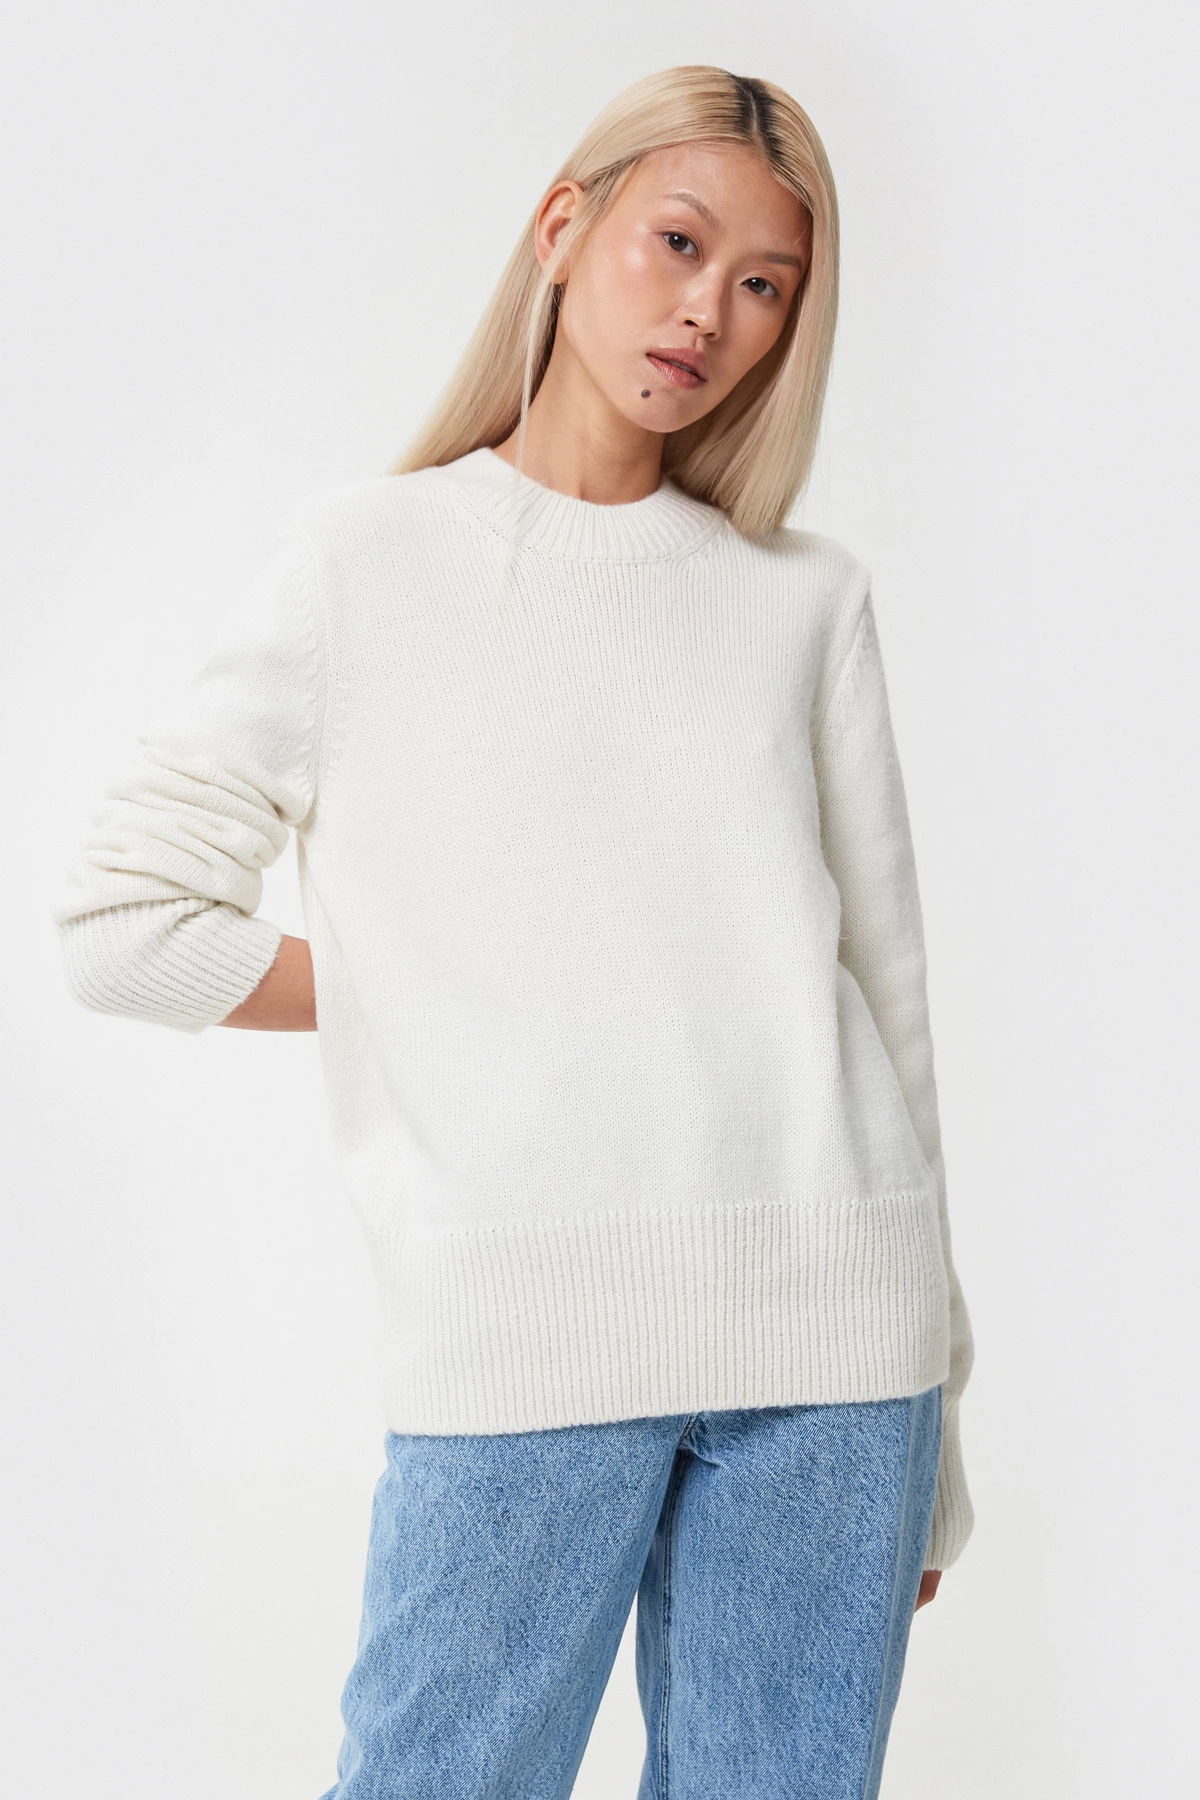 Milk knitted basic sweater with wool, photo 4